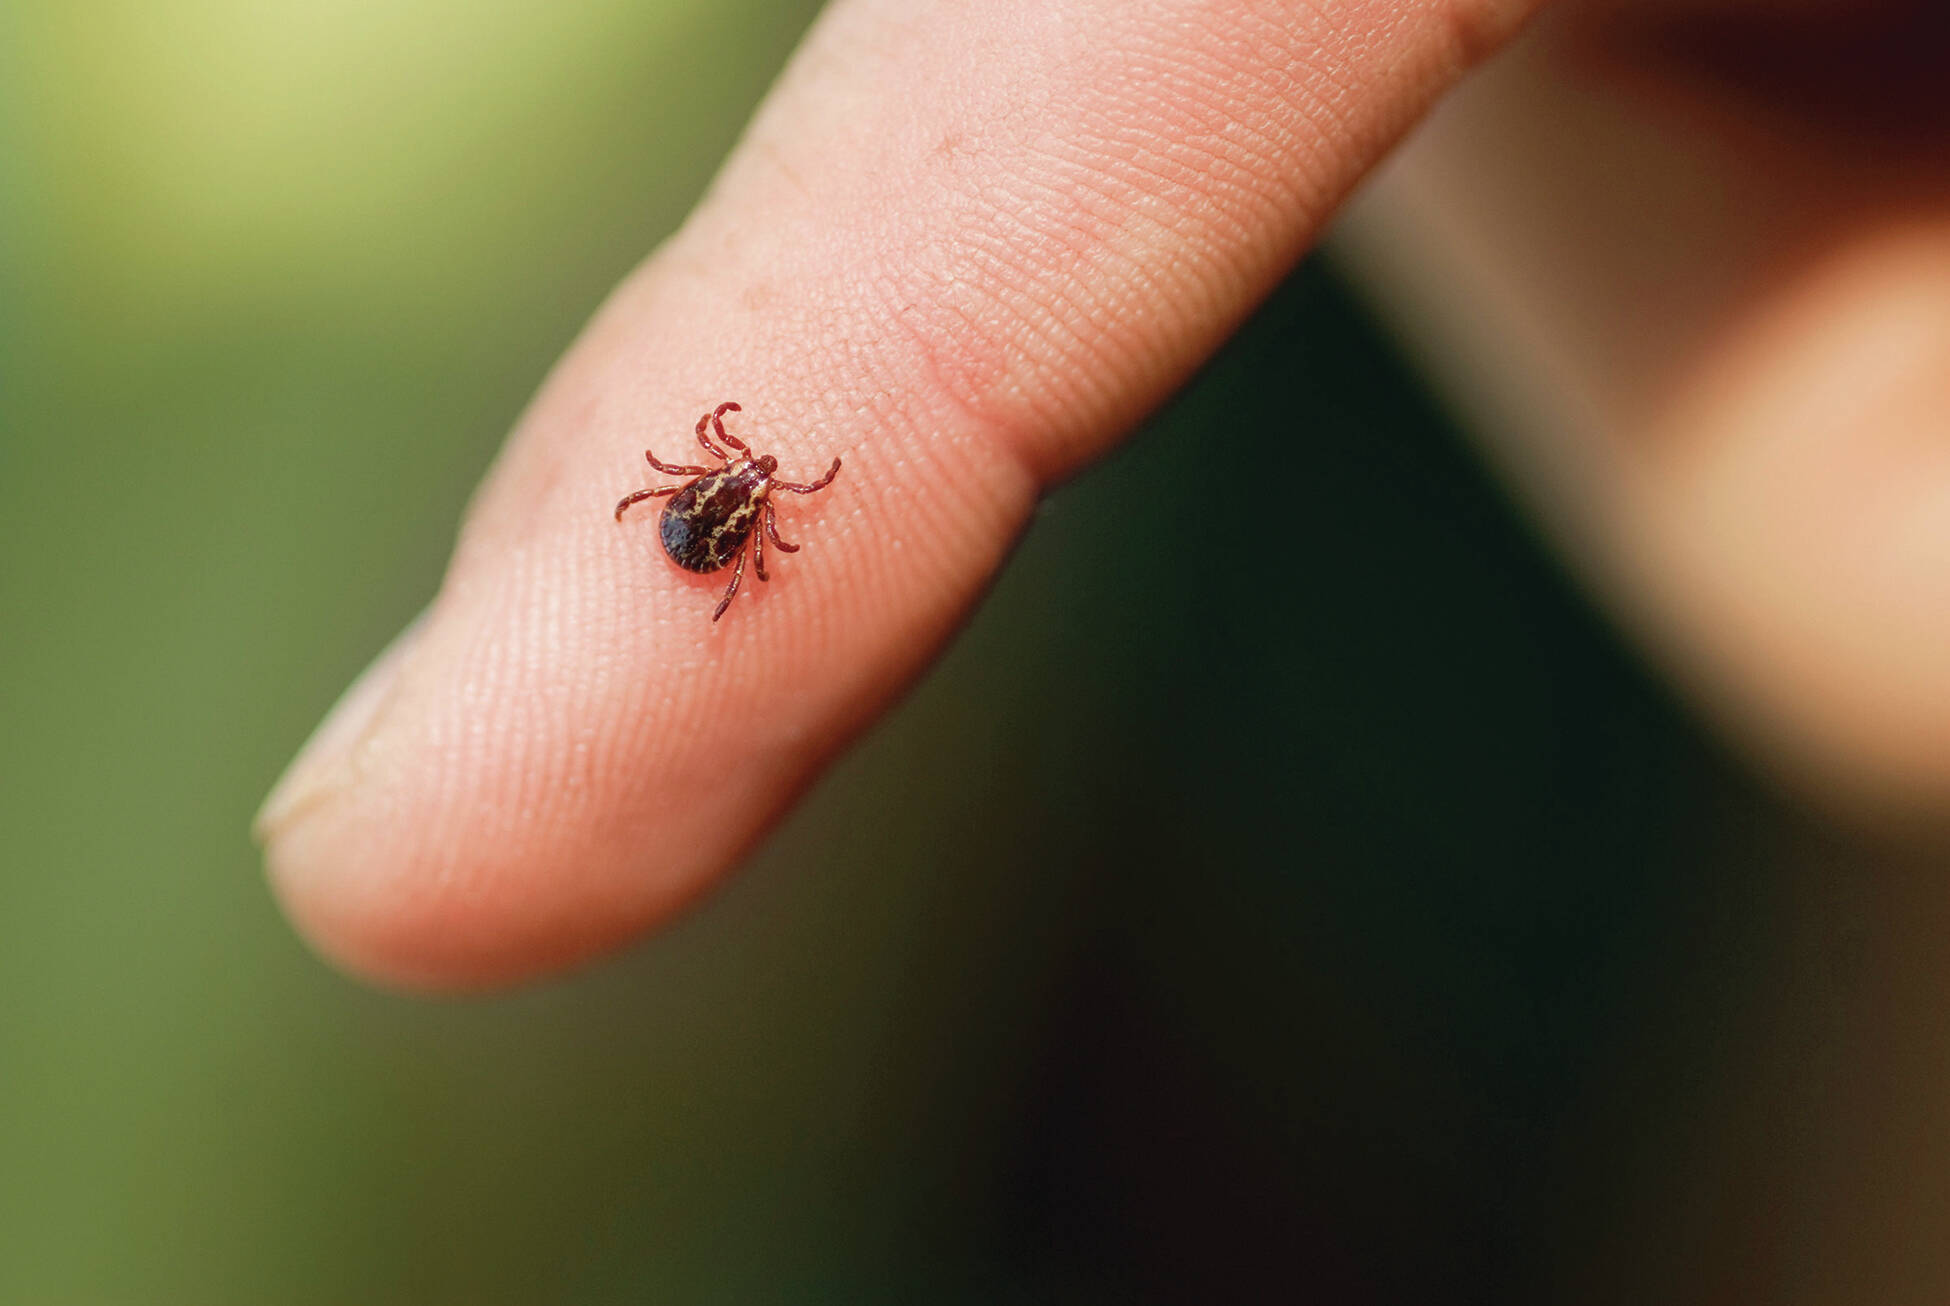 A tiny tick is almost unnoticeable when it’s hidden by an animals fur (or a human’s hair). Interior Health is warning people to check their pets and themselves for the tiny blood-drinkers when they return from enjoying the outdoors. (File photo)